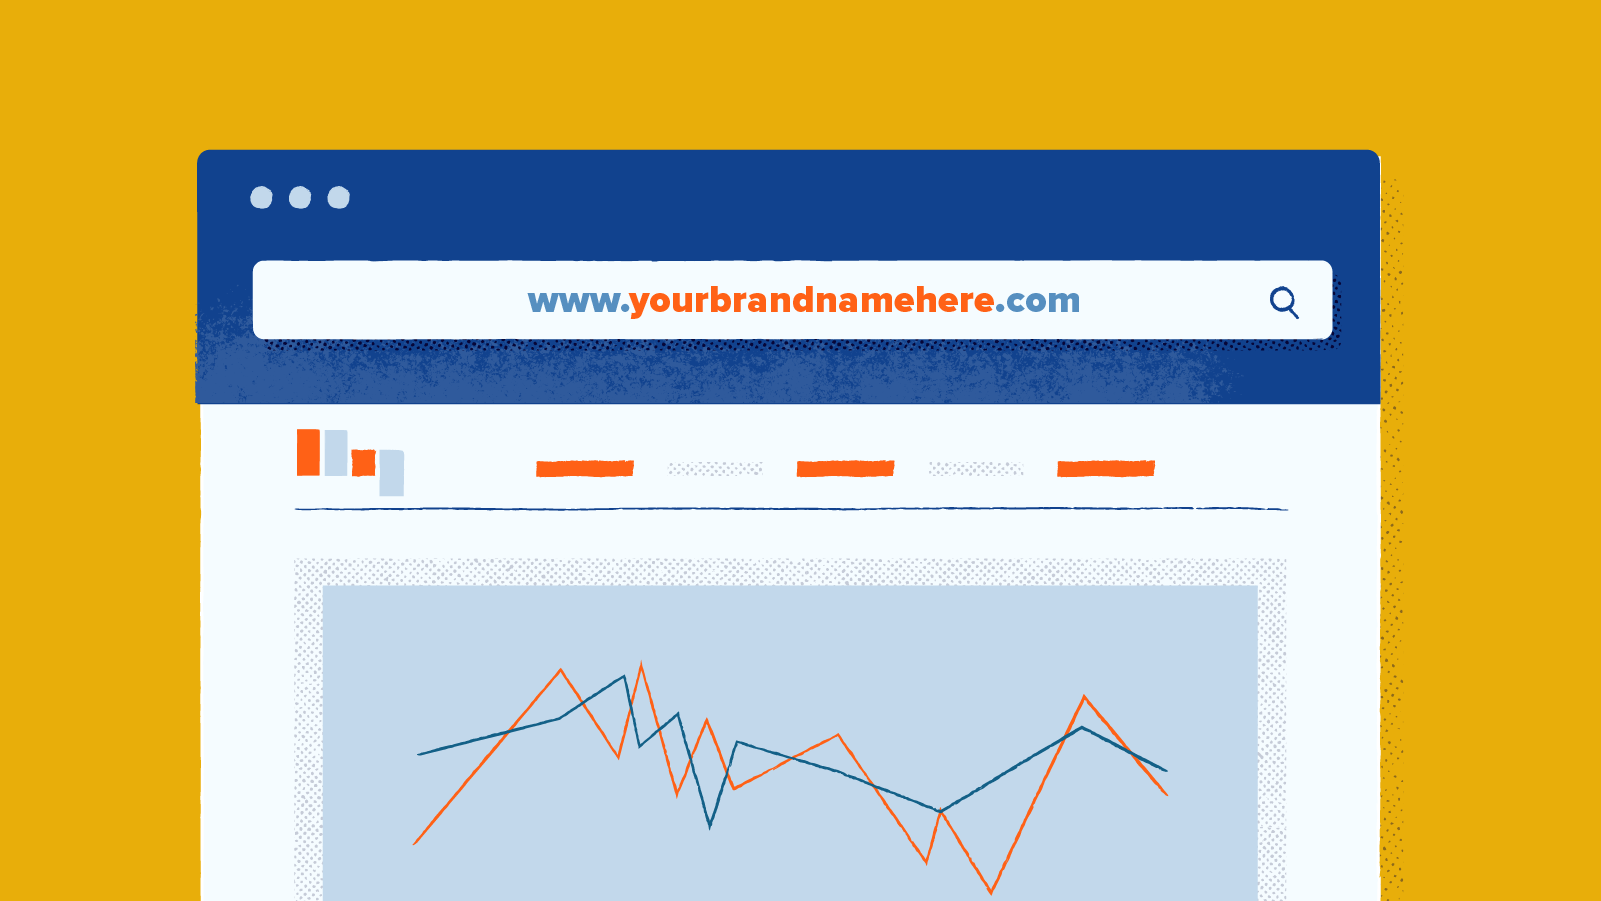 Domain name for your brand and analytics illustration